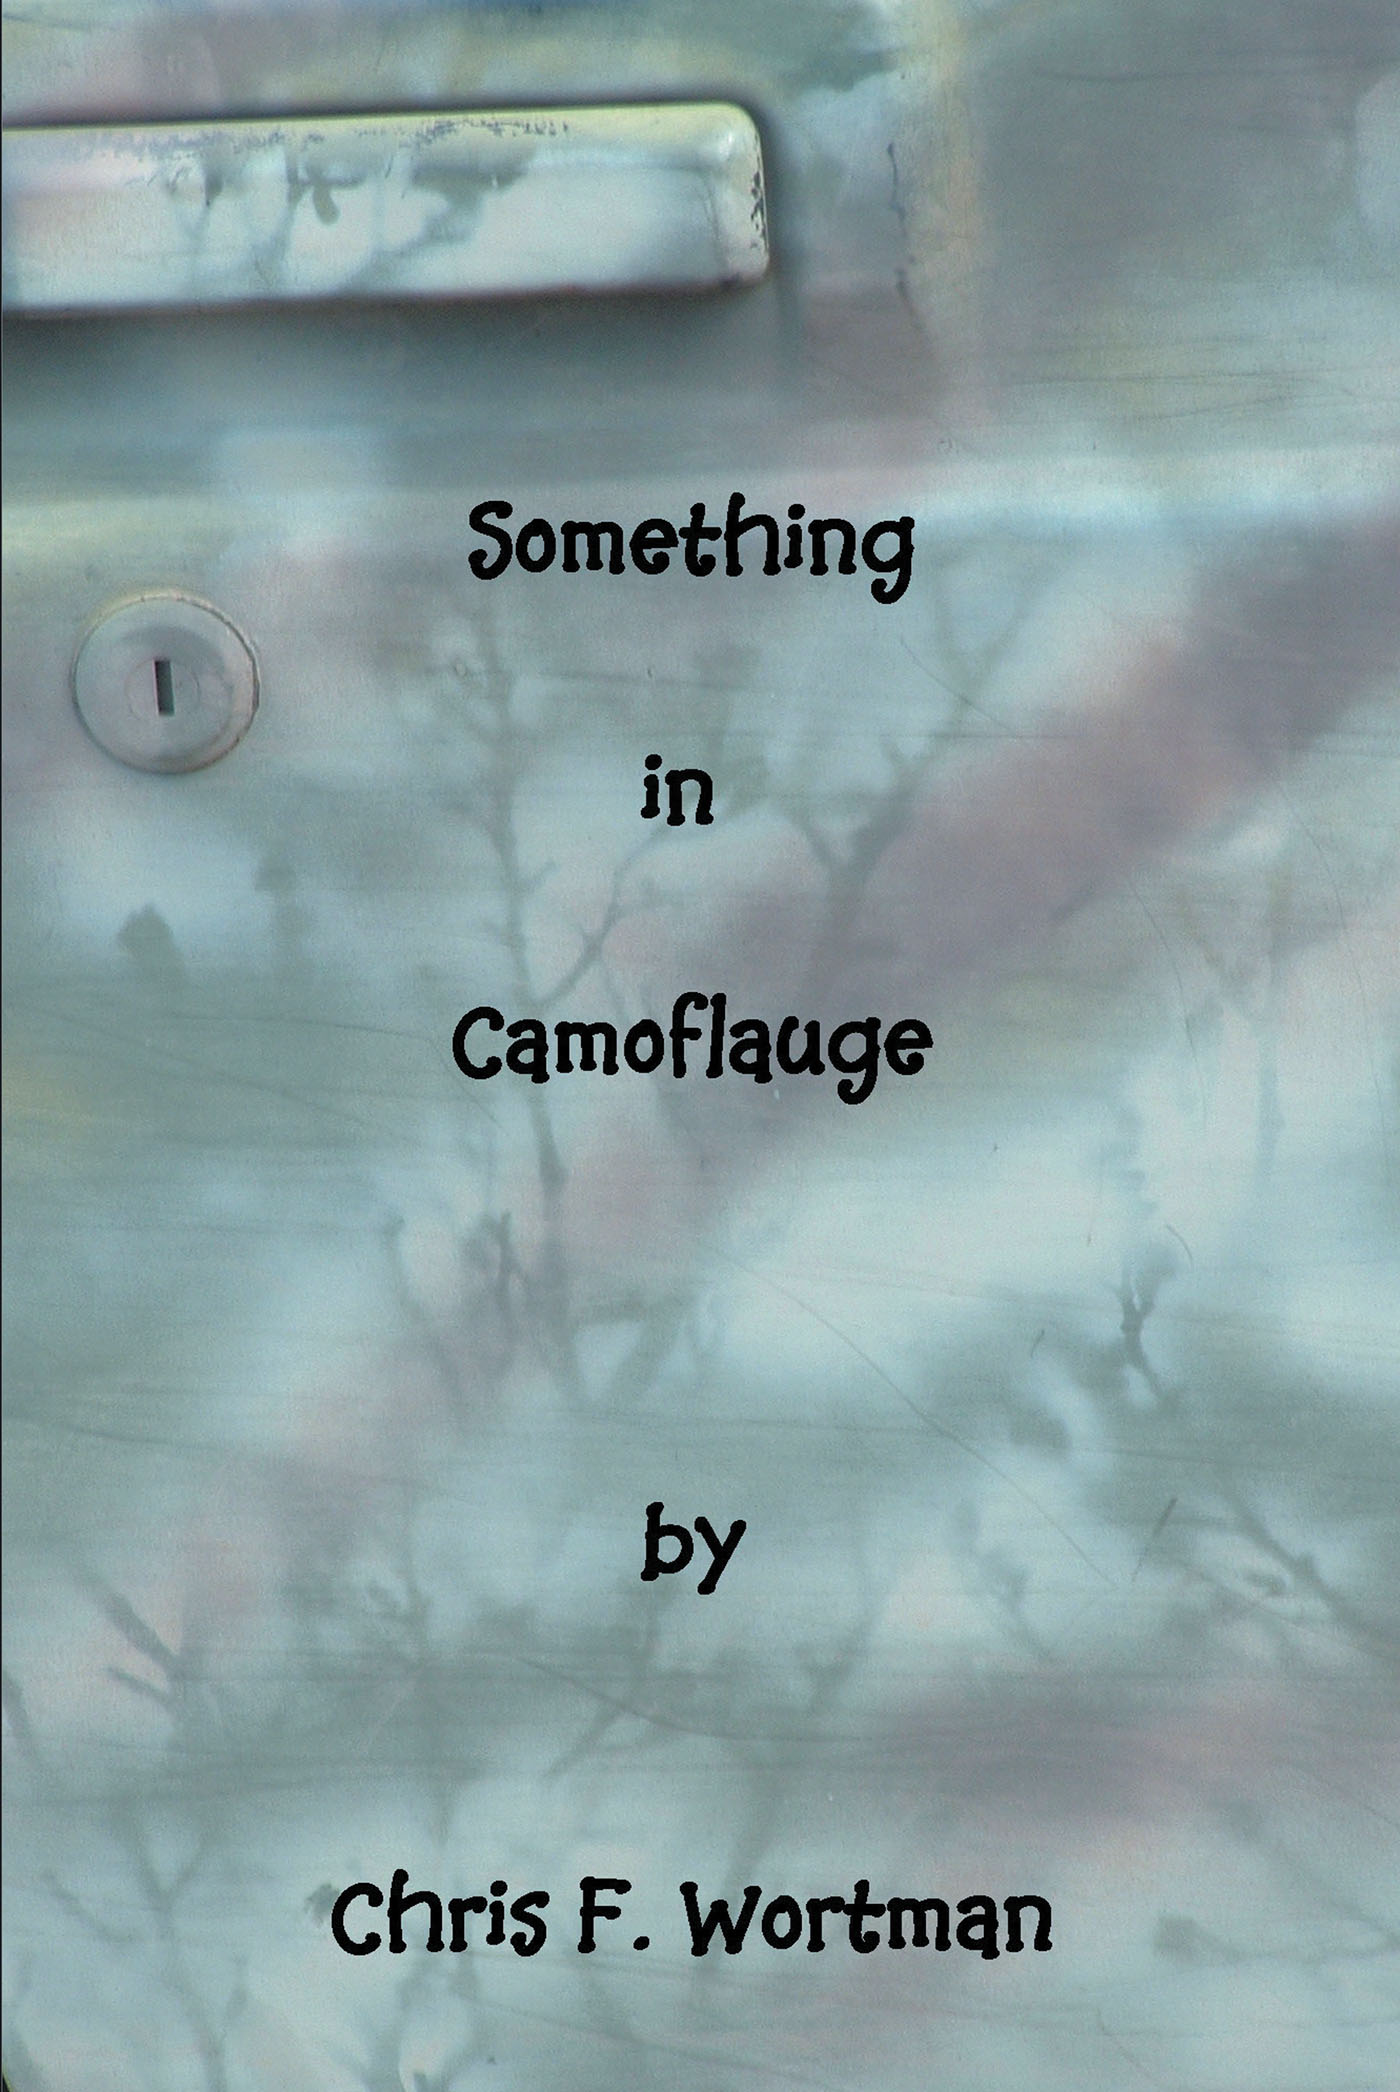 Author Chris F. Wortman’s New Book, "Something in Camouflage," is a Collection of Humorous Short Stories About a Wide Assortment of Topics